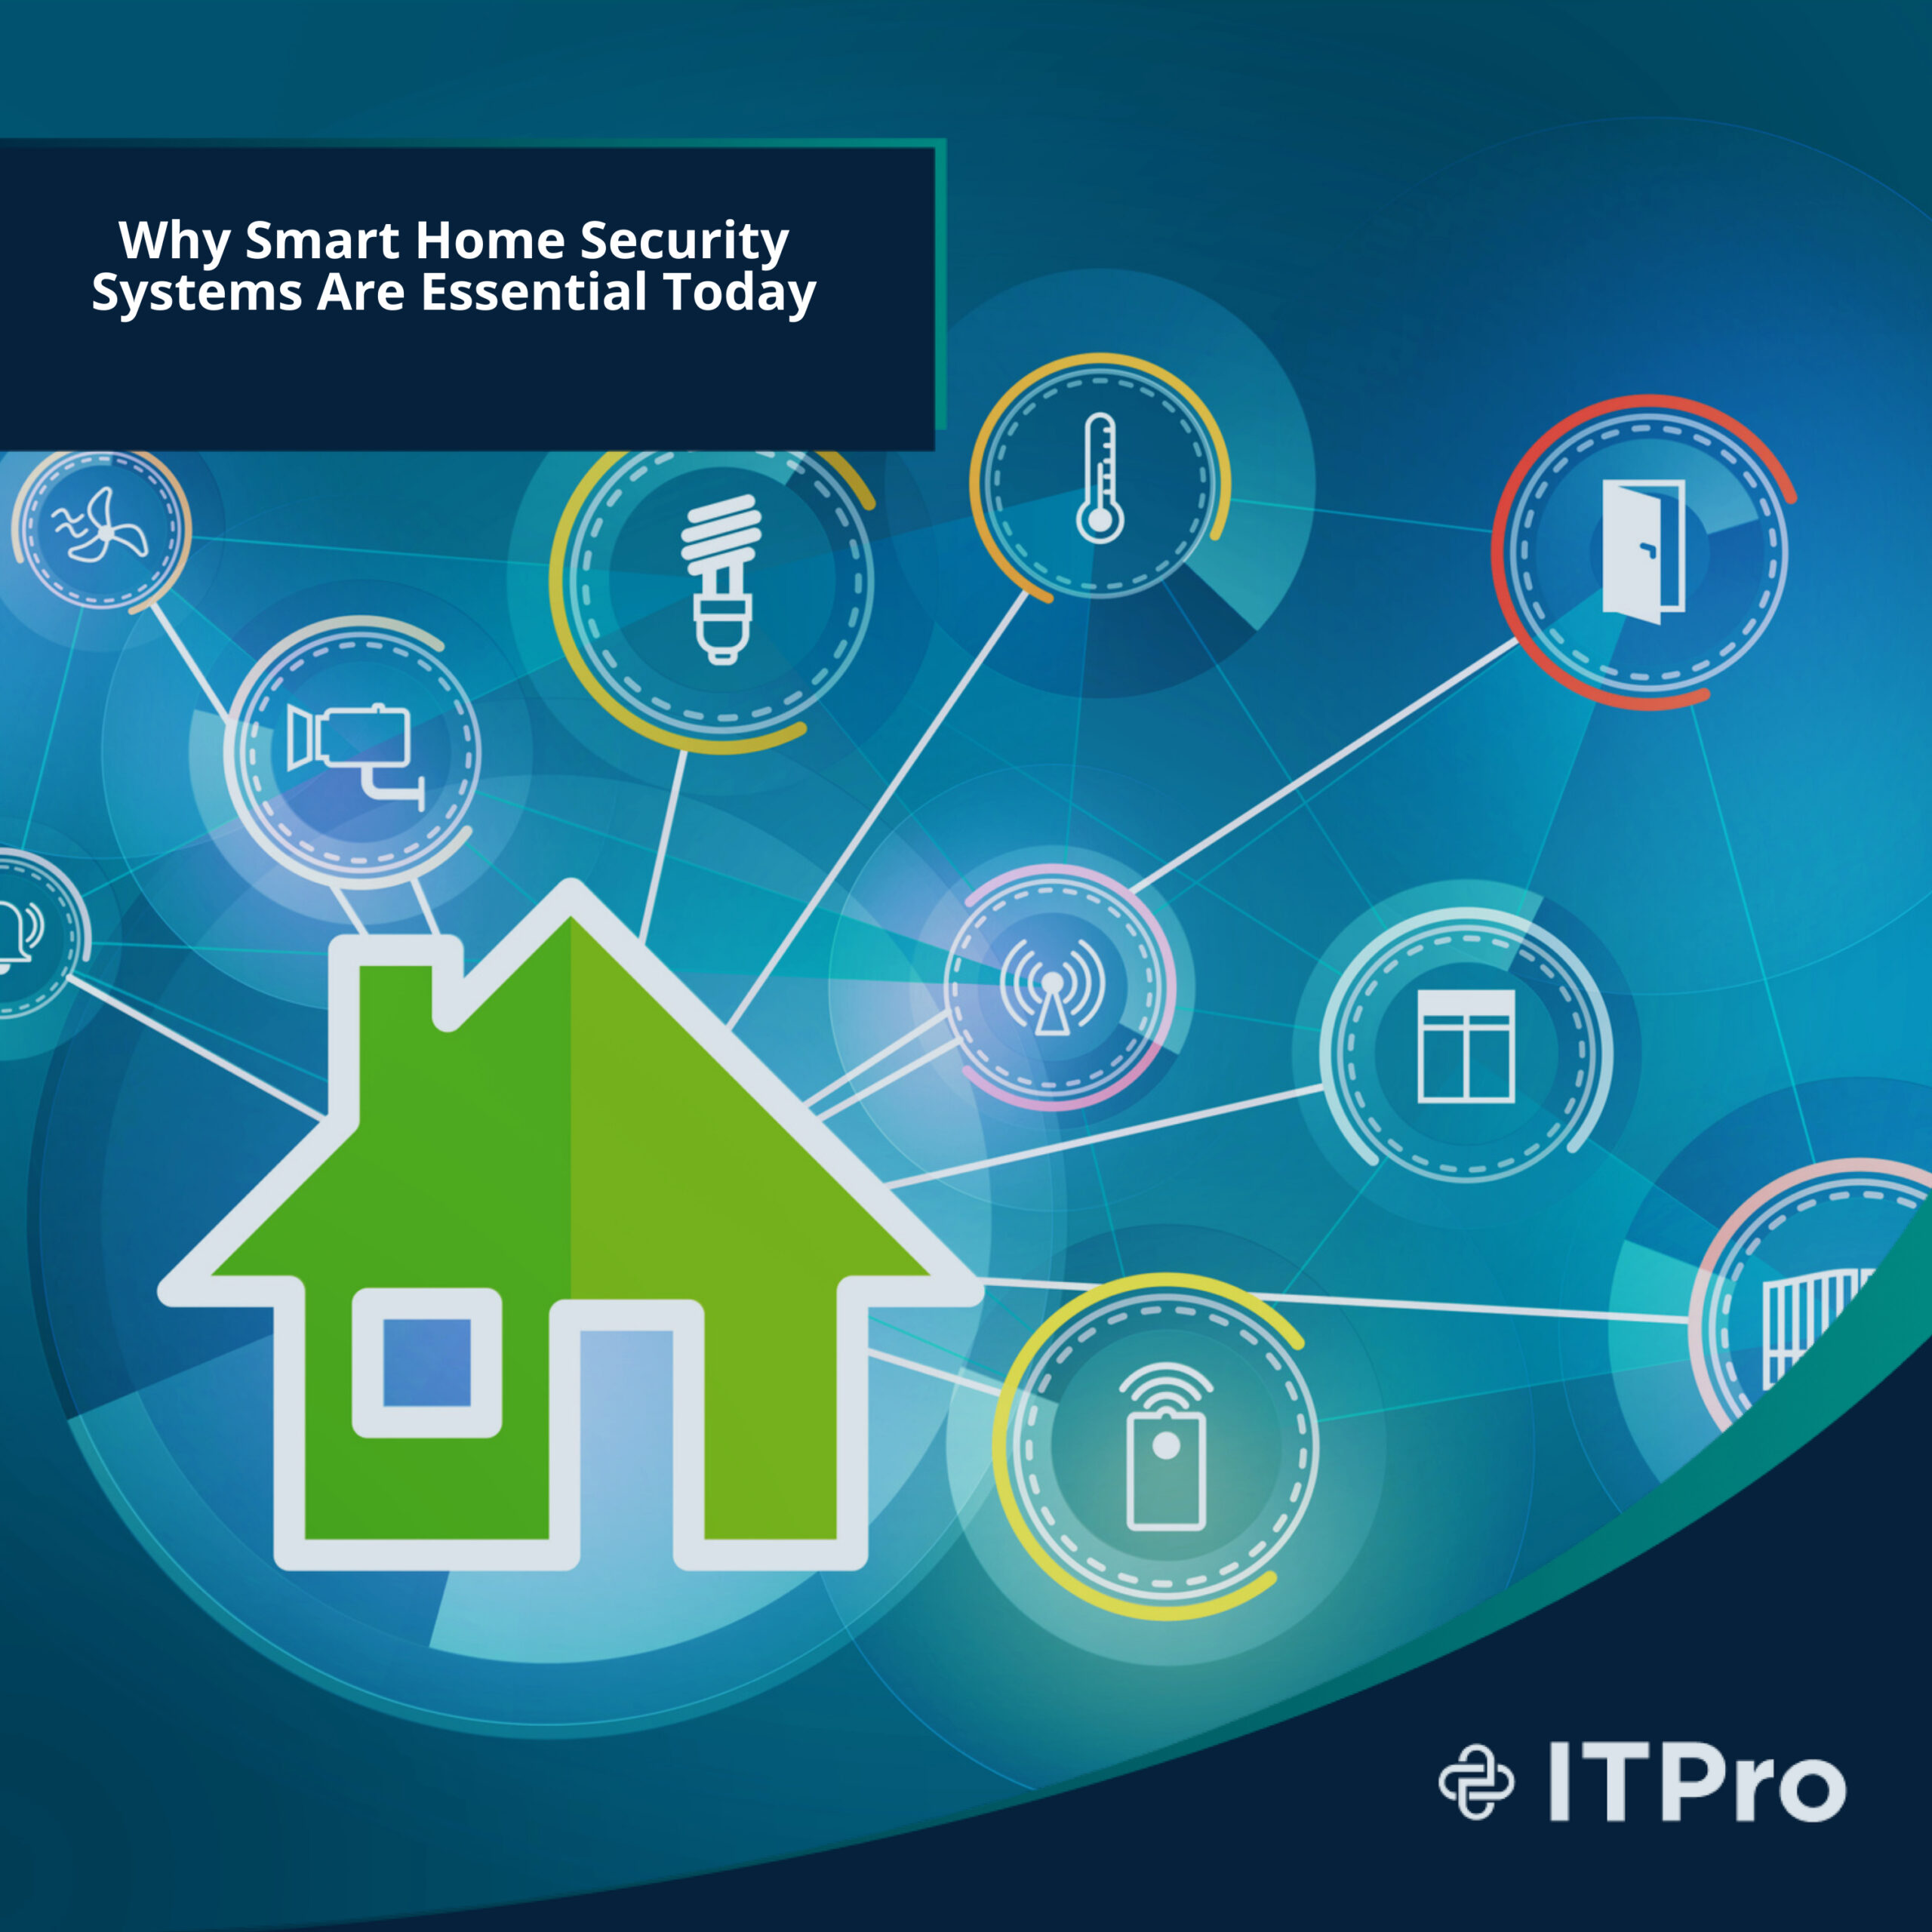 Why Smart Home Security Systems Are Essential Today